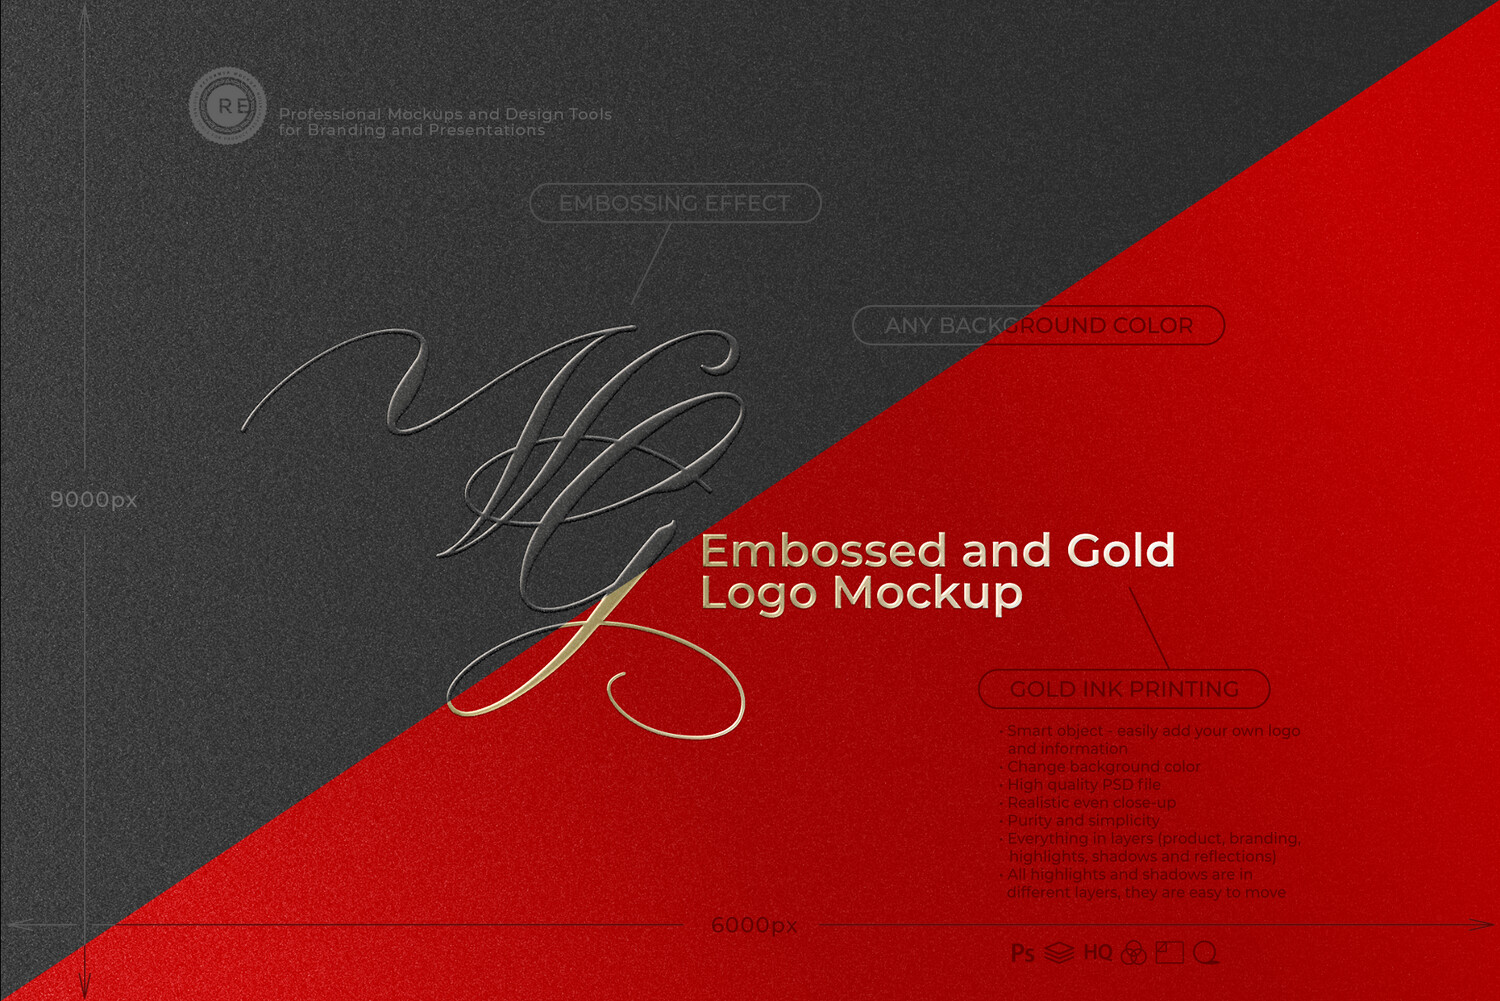 Embossed and Gold Logo Mockup